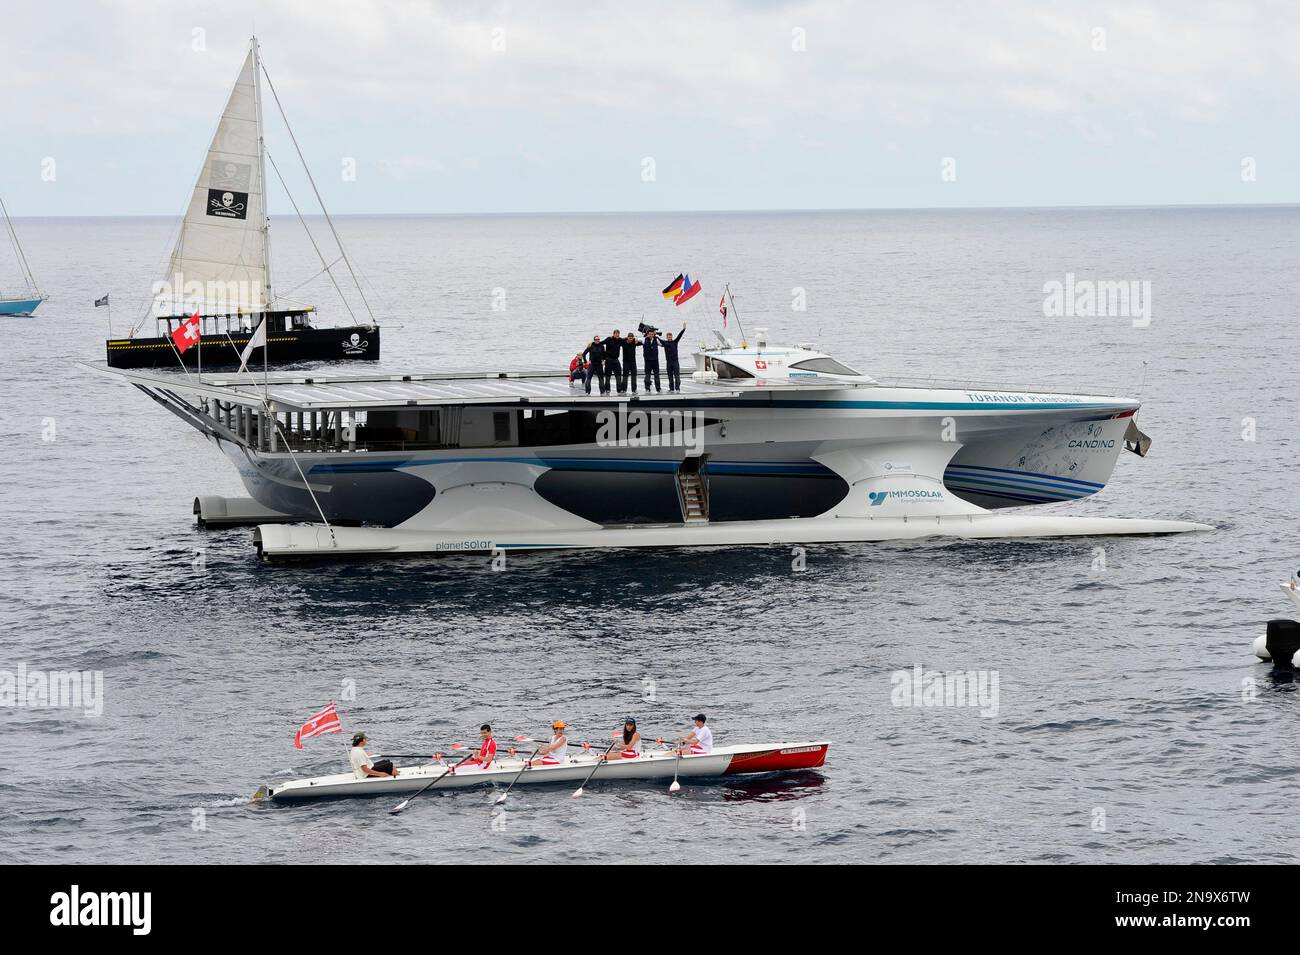 The sailors of the MS Turanor PlanetSolar, the world's largest solar boat ever built, stand on the deck after they have achieved the first around-the-world journey using solar energy in 585 days, off the Monaco's harbour, Friday, May 4, 2012. The five sailors are : Raphael Domjan of Switzerland, founder and expedition leader, Patrick Marchesseau of France, Erwann le Rouzic of France, Jens Langwasser of Germany and Christian Oechsenbeim of Switzerland. (AP Photo/Bruno Bebert) Stock Photo